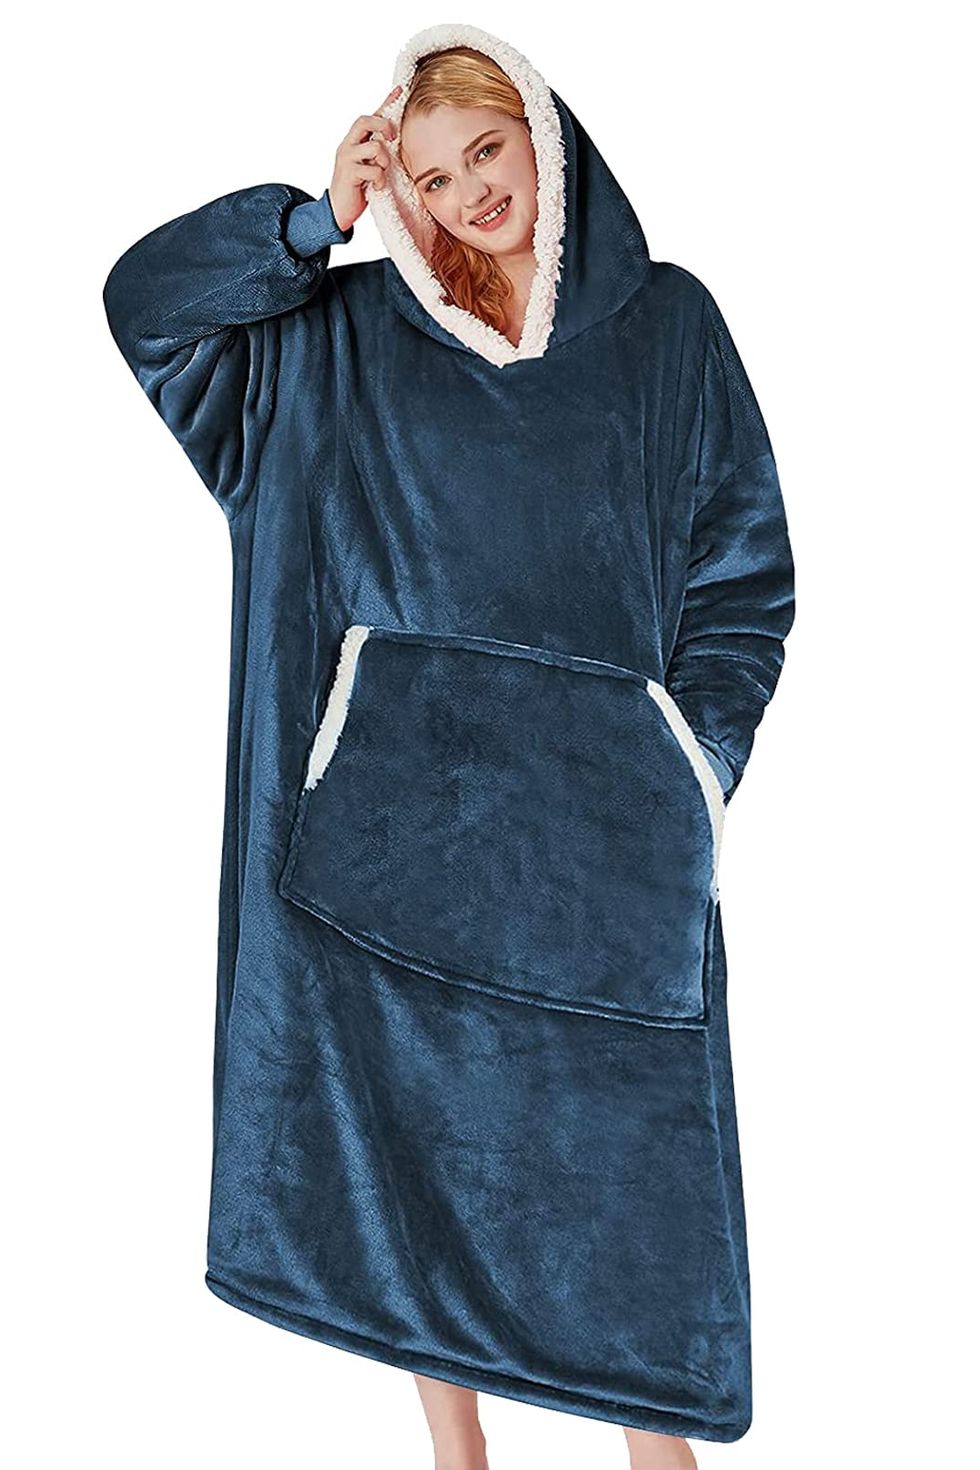 You can now buy a giant hoodie blanket lined with teddy fleece and